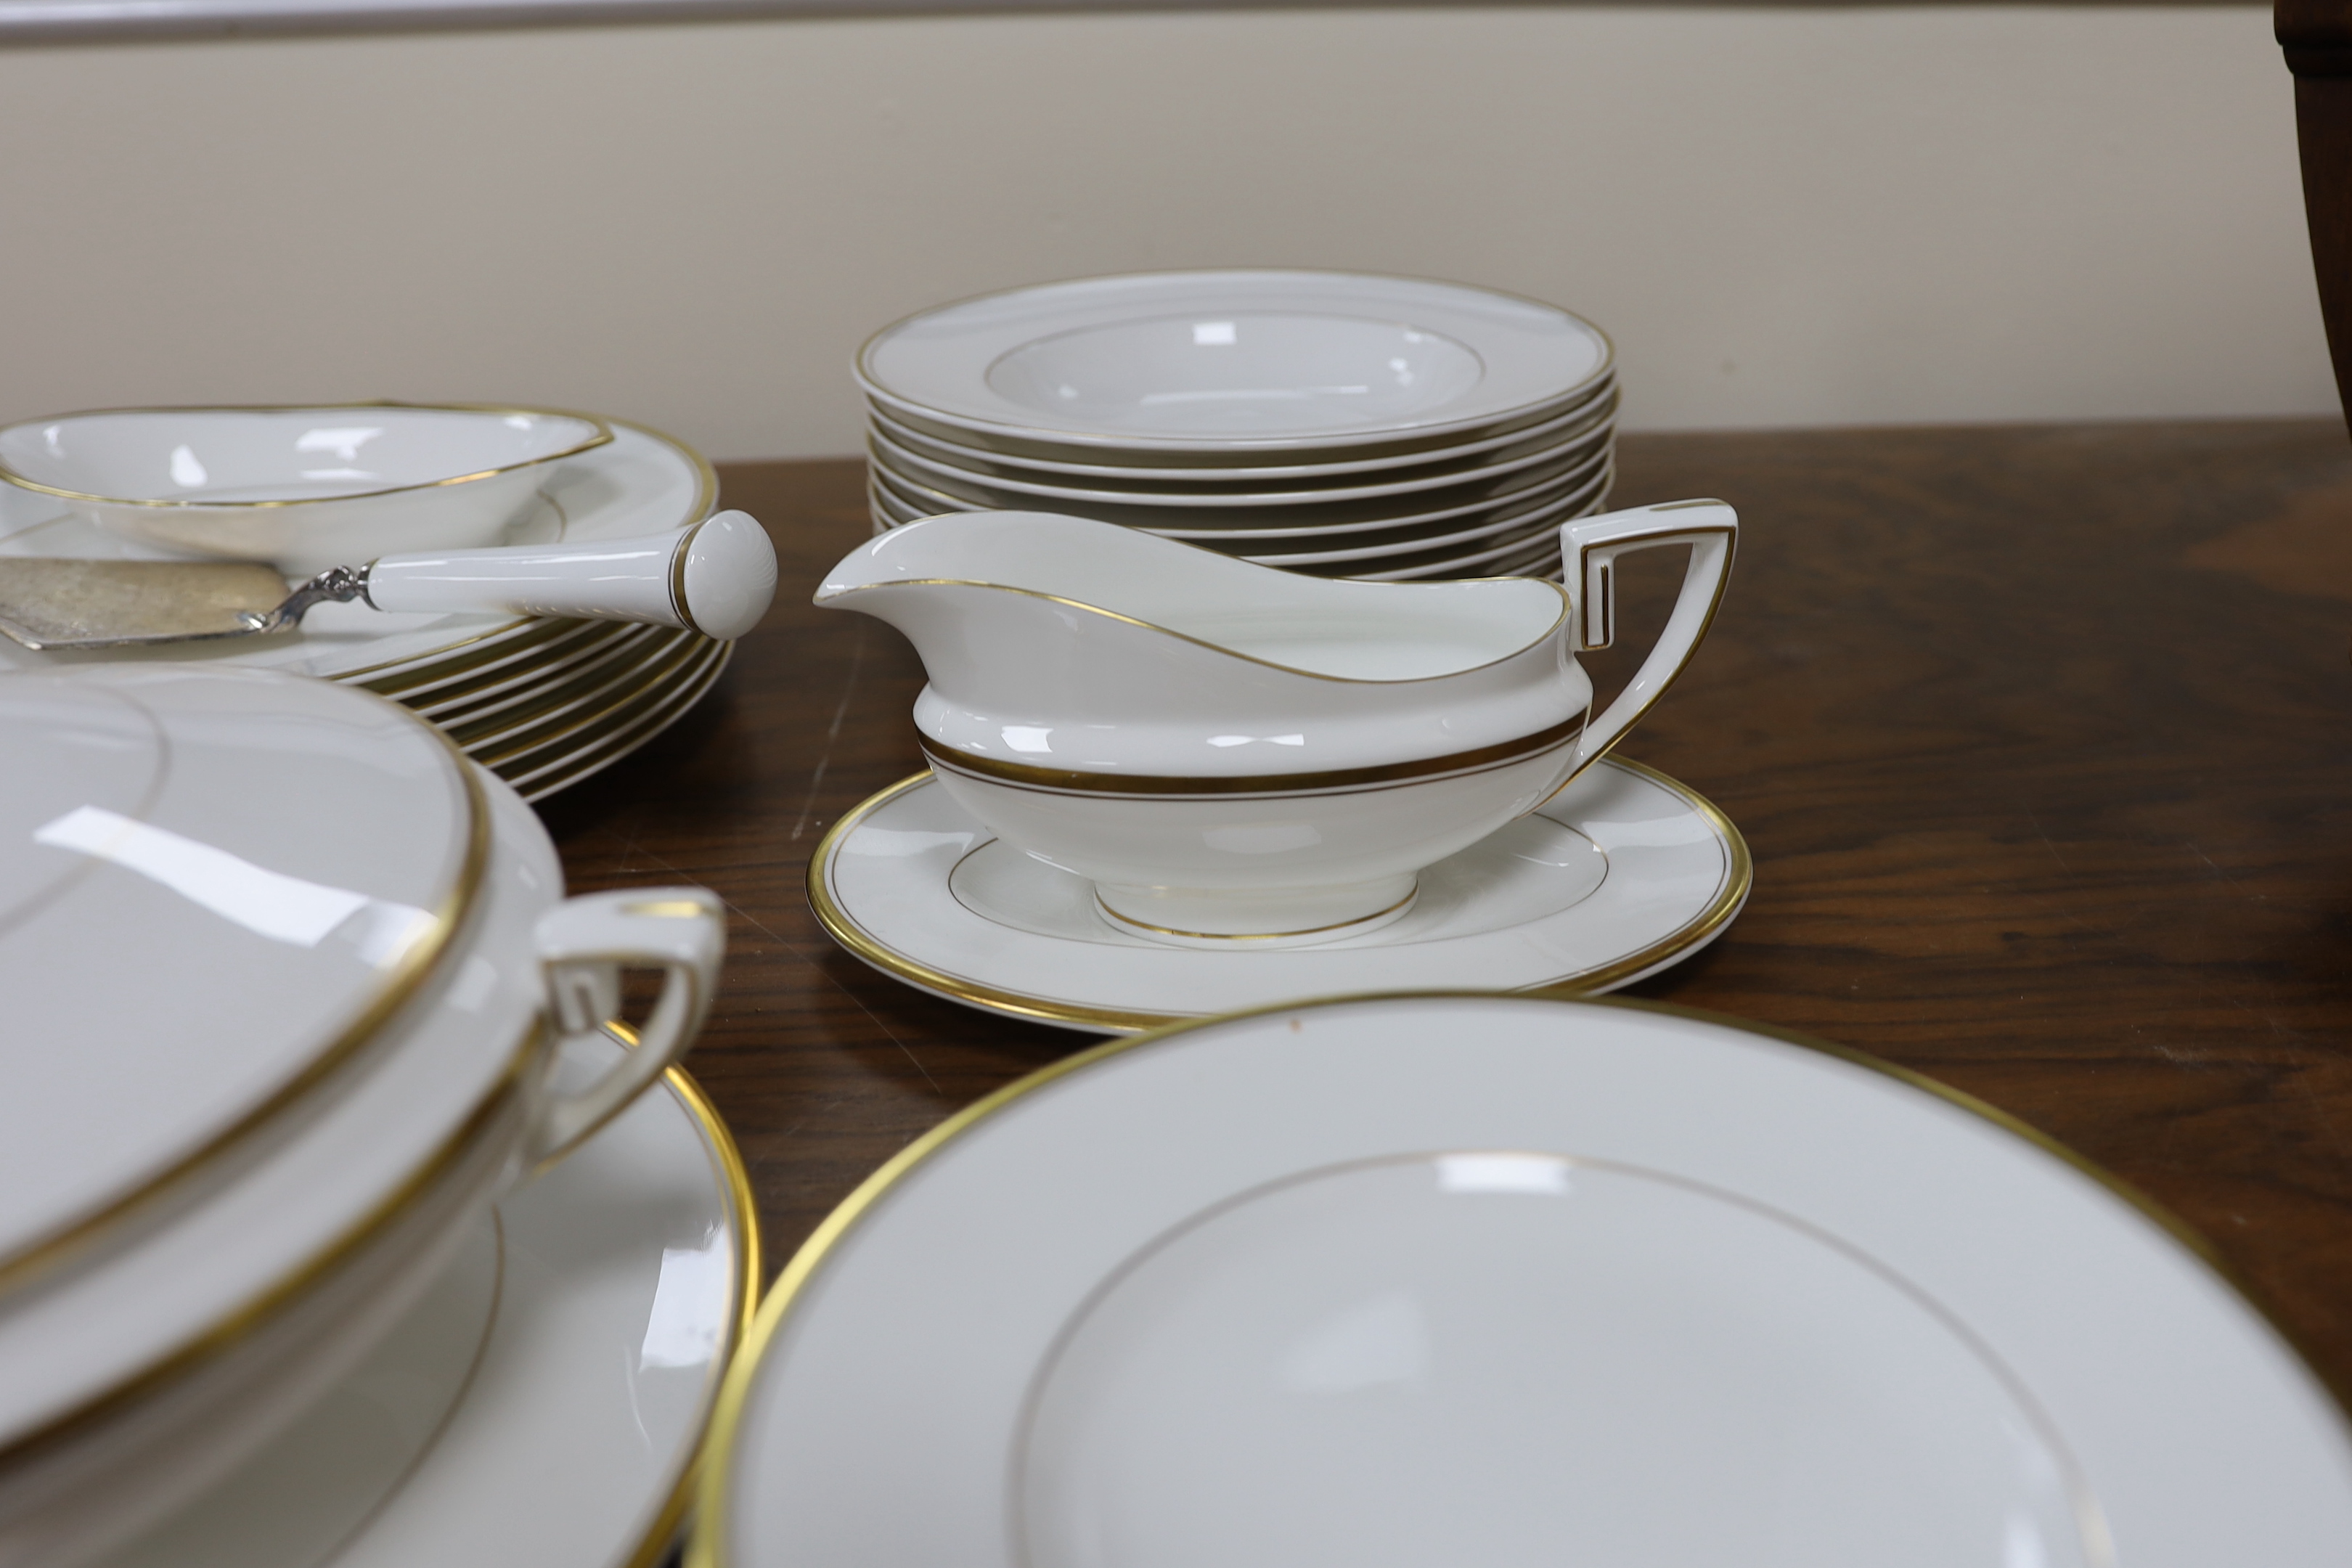 A Worcester ‘Viceroy’ part dinner service, including a bread/cake plate and a cake slice